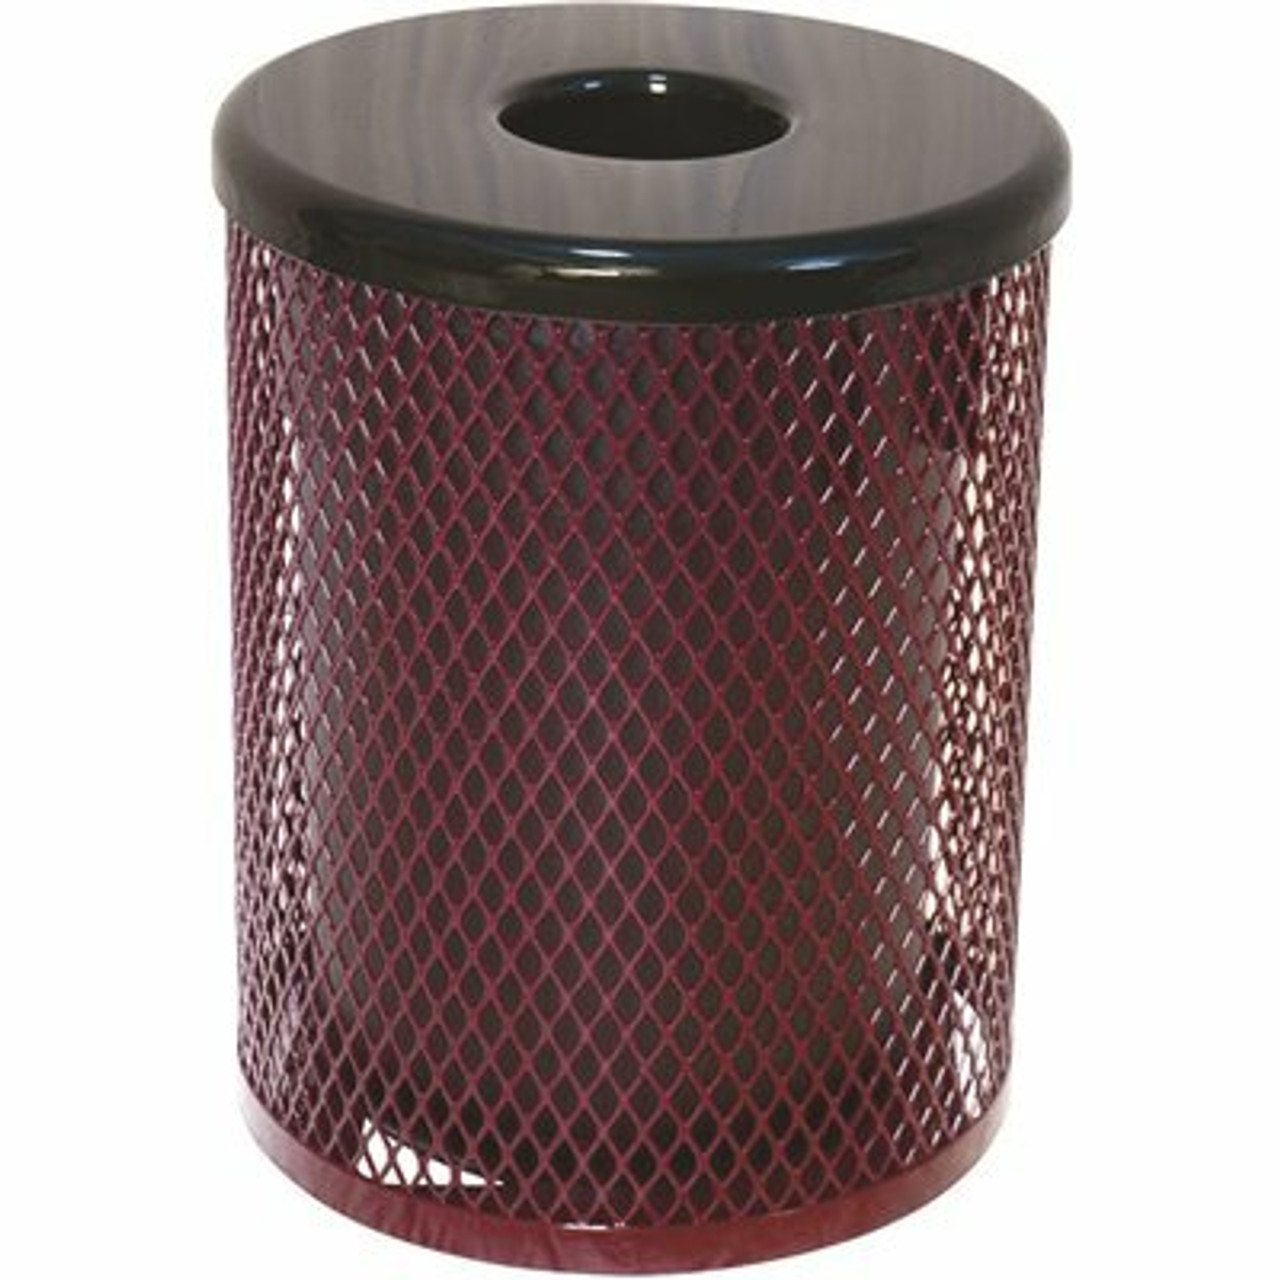 Everest 32 Gal. Burgundy Trash Receptacle With Flat Top